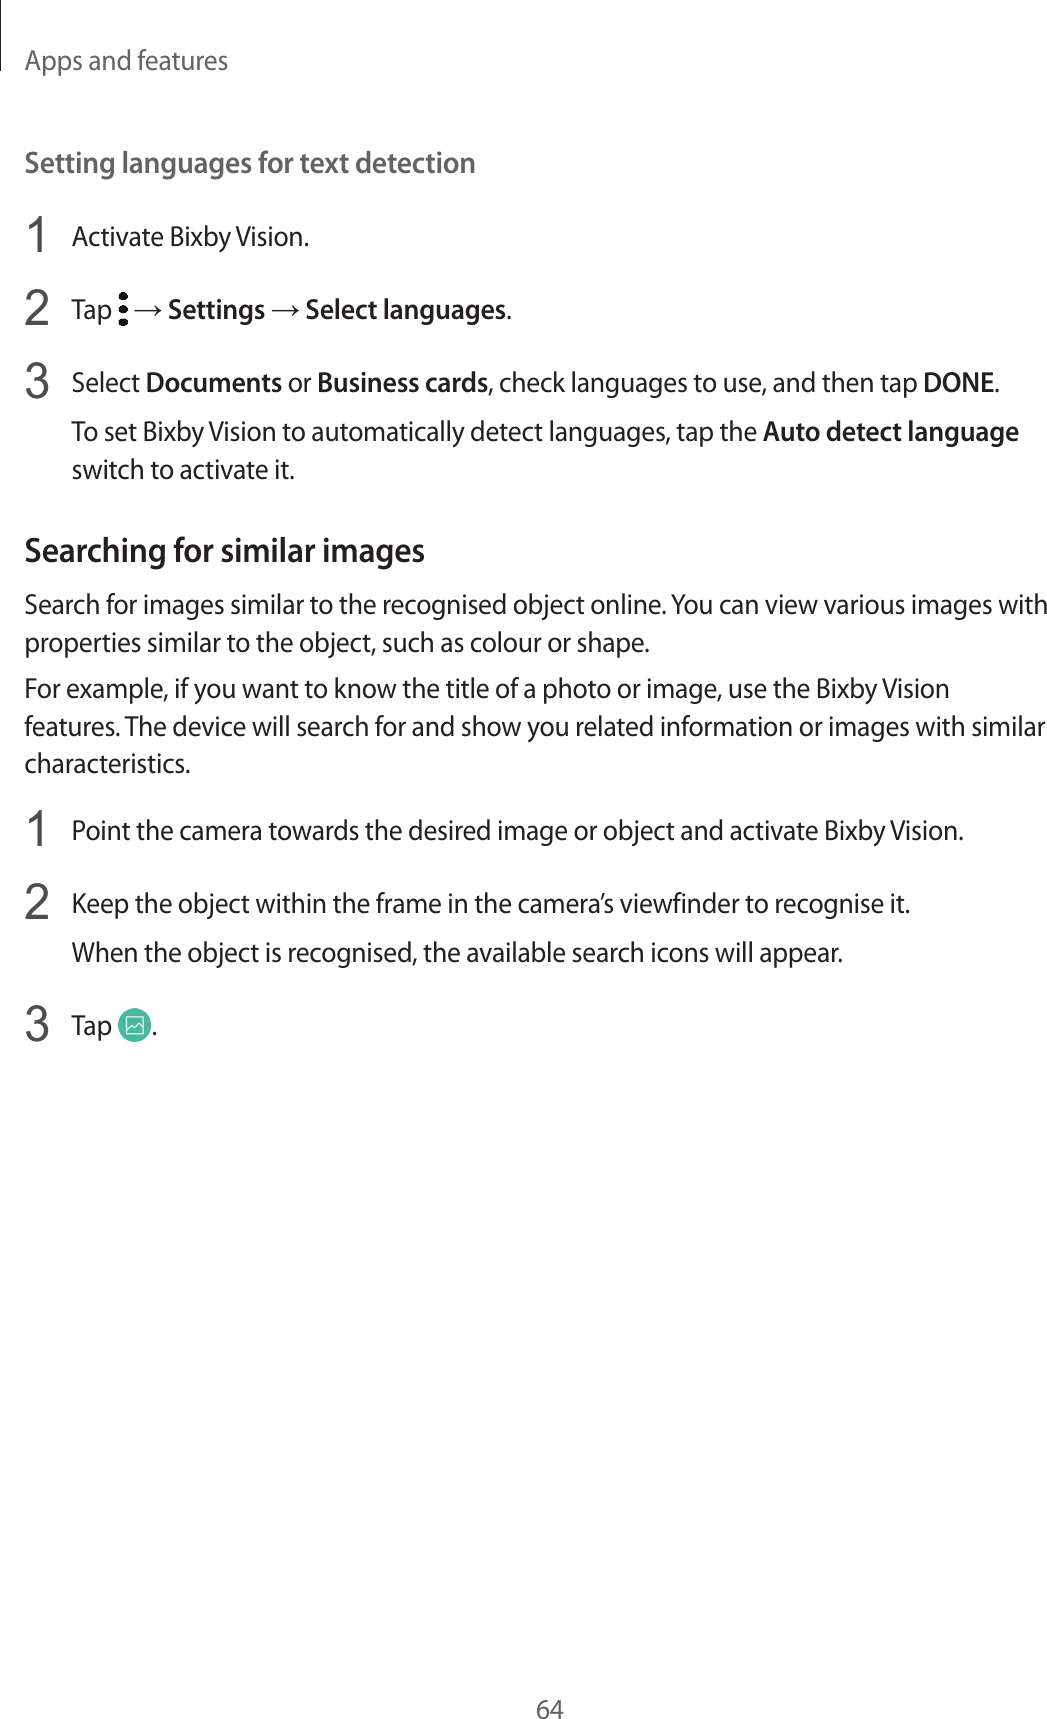 Apps and features64Setting languages for text detection1  Activate Bixby Vision.2  Tap   → Settings → Select languages.3  Select Documents or Business cards, check languages to use, and then tap DONE.To set Bixby Vision to automatically detect languages, tap the Auto detect language switch to activate it.Searching for similar imagesSearch for images similar to the recognised object online. You can view various images with properties similar to the object, such as colour or shape.For example, if you want to know the title of a photo or image, use the Bixby Vision features. The device will search for and show you related information or images with similar characteristics.1  Point the camera towards the desired image or object and activate Bixby Vision.2  Keep the object within the frame in the camera’s viewfinder to recognise it.When the object is recognised, the available search icons will appear.3  Tap  .